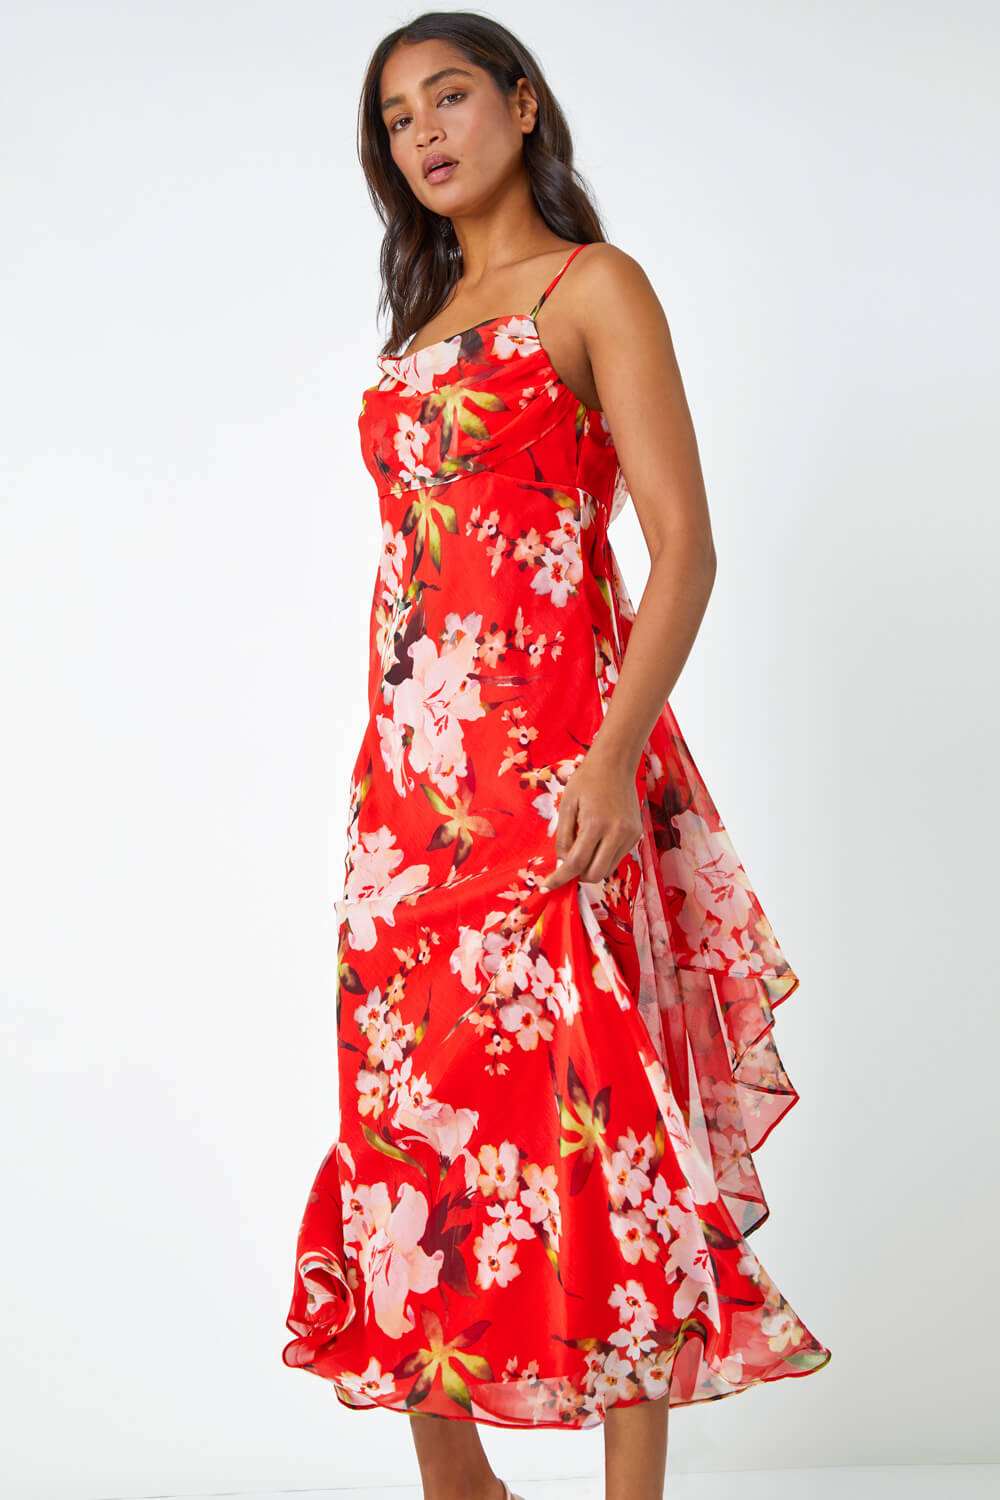 Red Floral Cowl Neck Chiffon Dress, Image 4 of 6